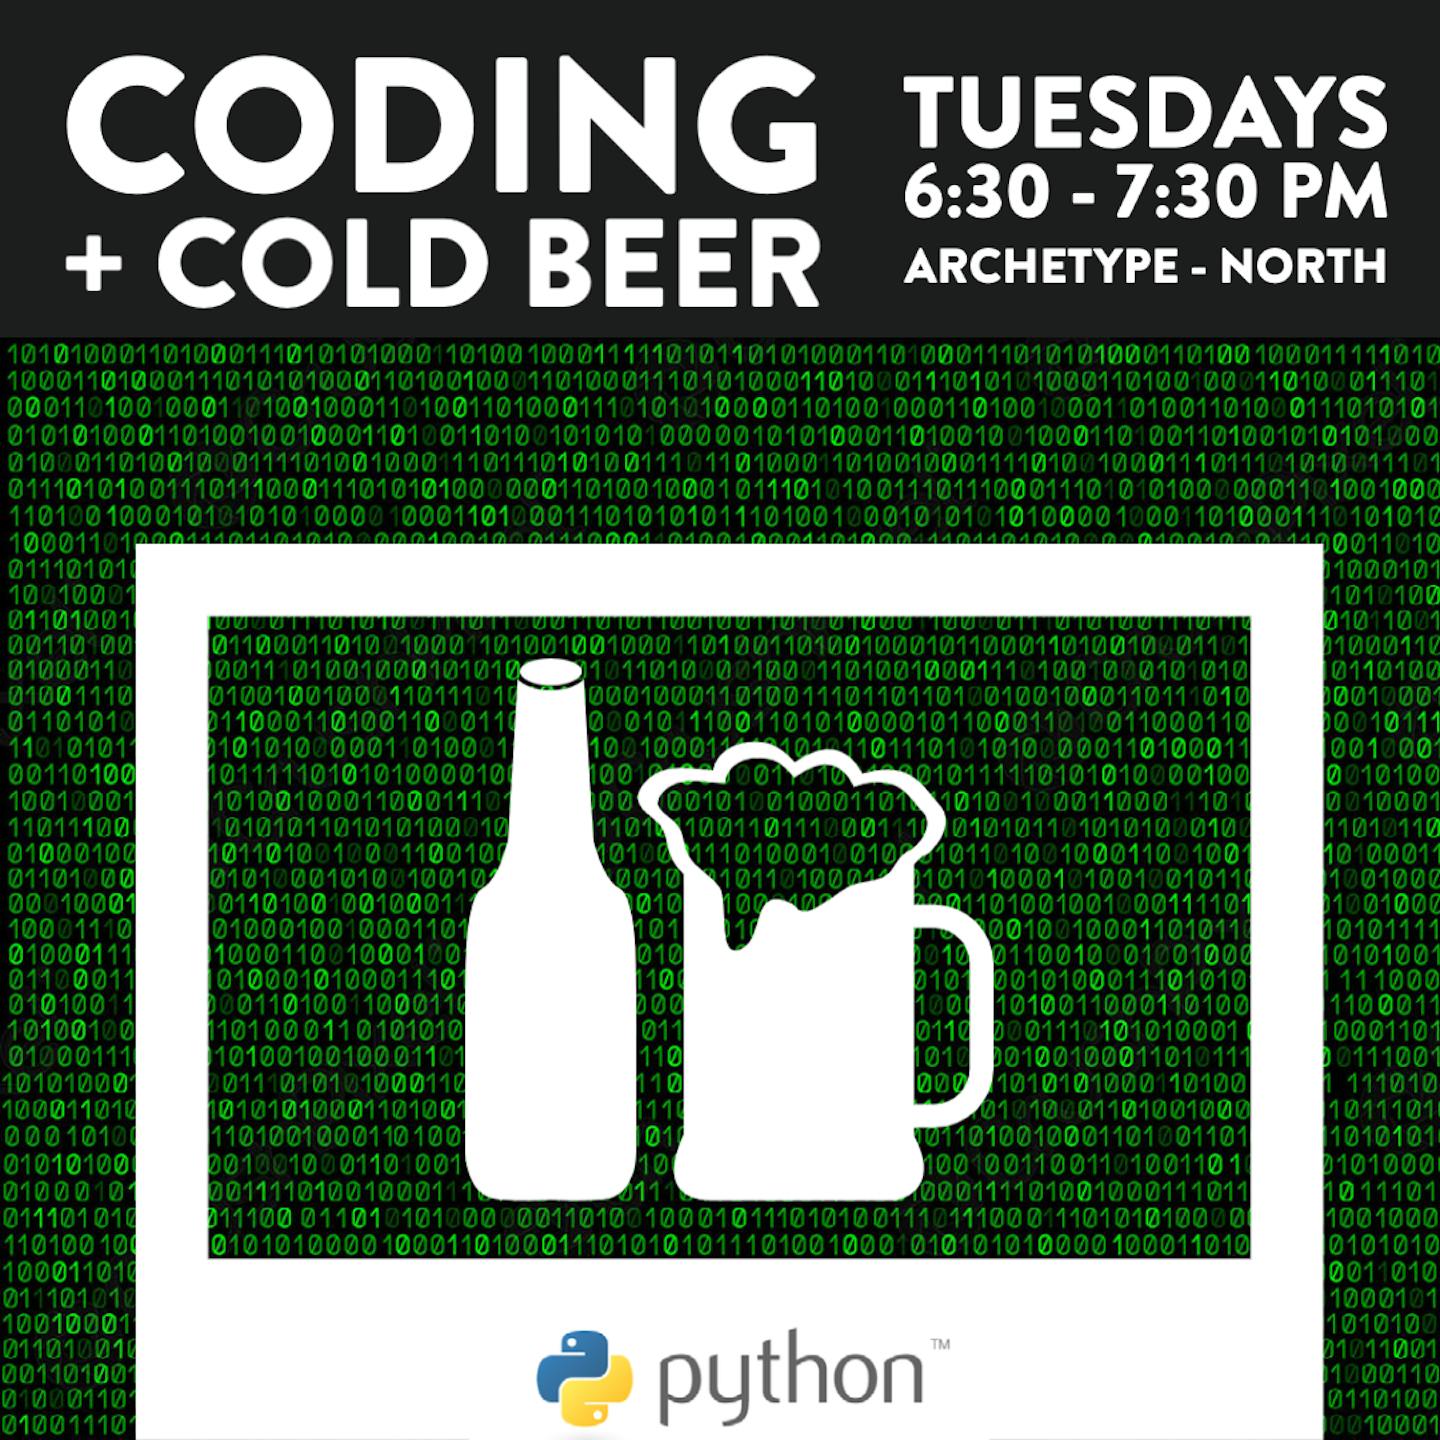 Cold Beer + Coding Facebook Event (1)